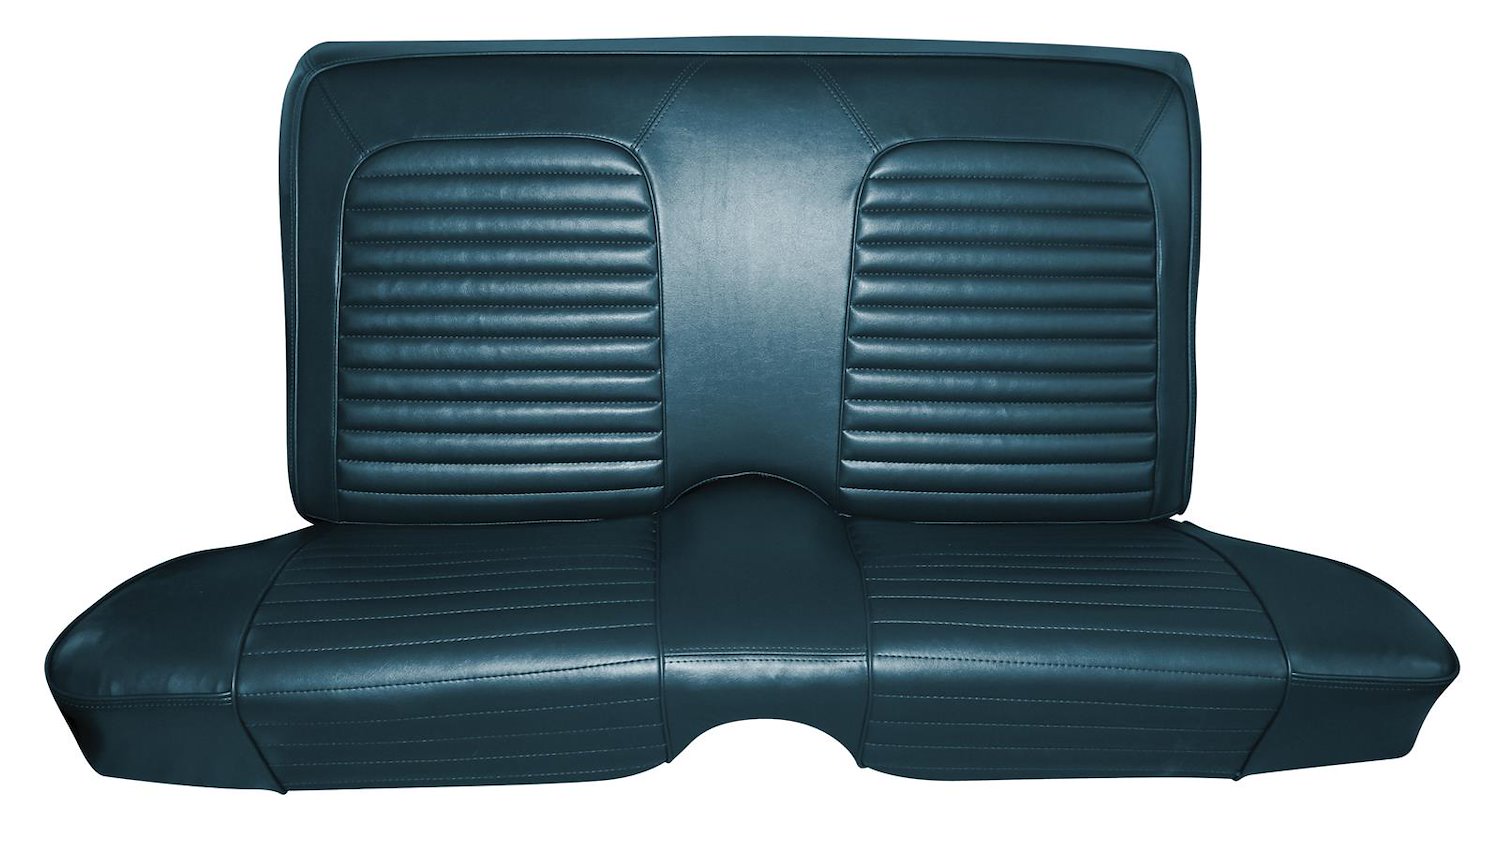 1963 Ford Falcon Futura 4-Door Station Wagon Interior Two-Tone Rear Bench Seat Upholstery Set